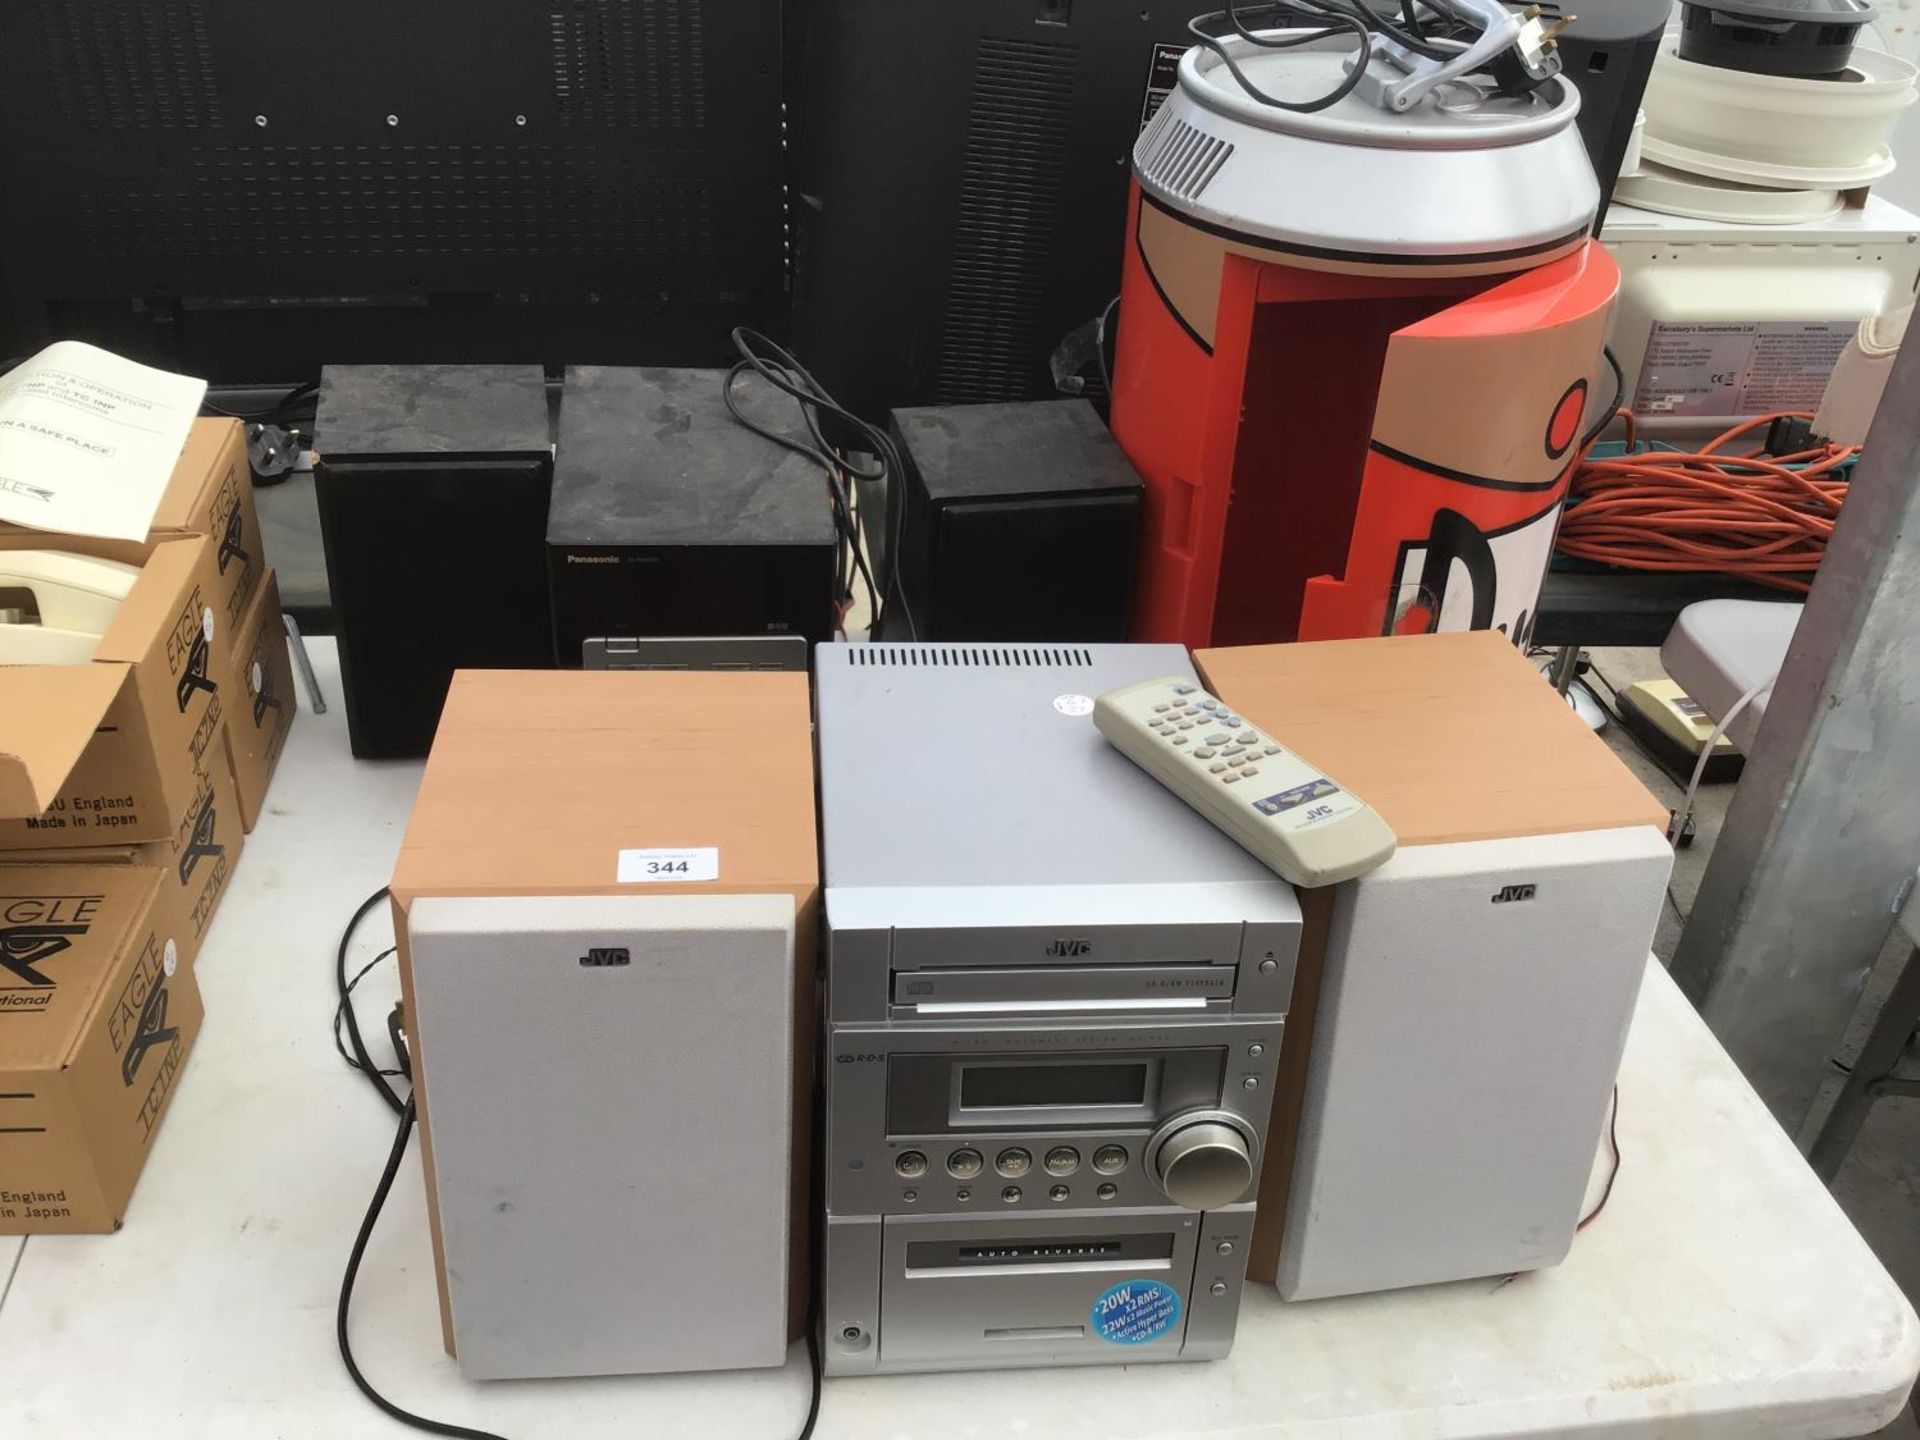 TWO HI FIS WITH SPEAKERS AND A 'DUFF BEER' FRIDGE IN WORKING ORDER